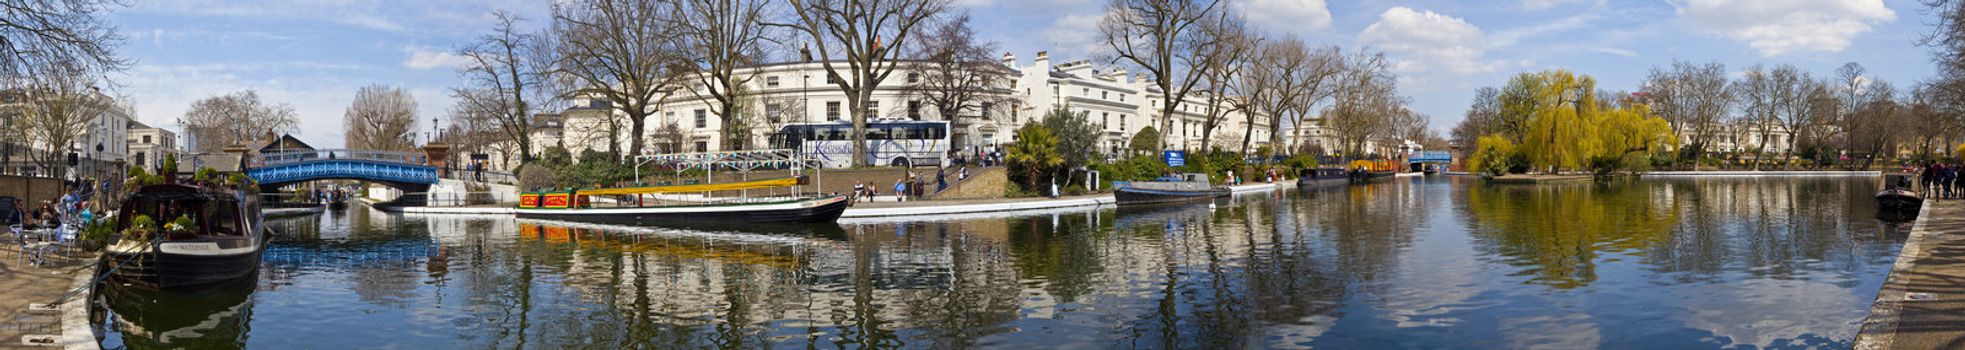 Panoramic view of the beautiful area of Little Venice in London.